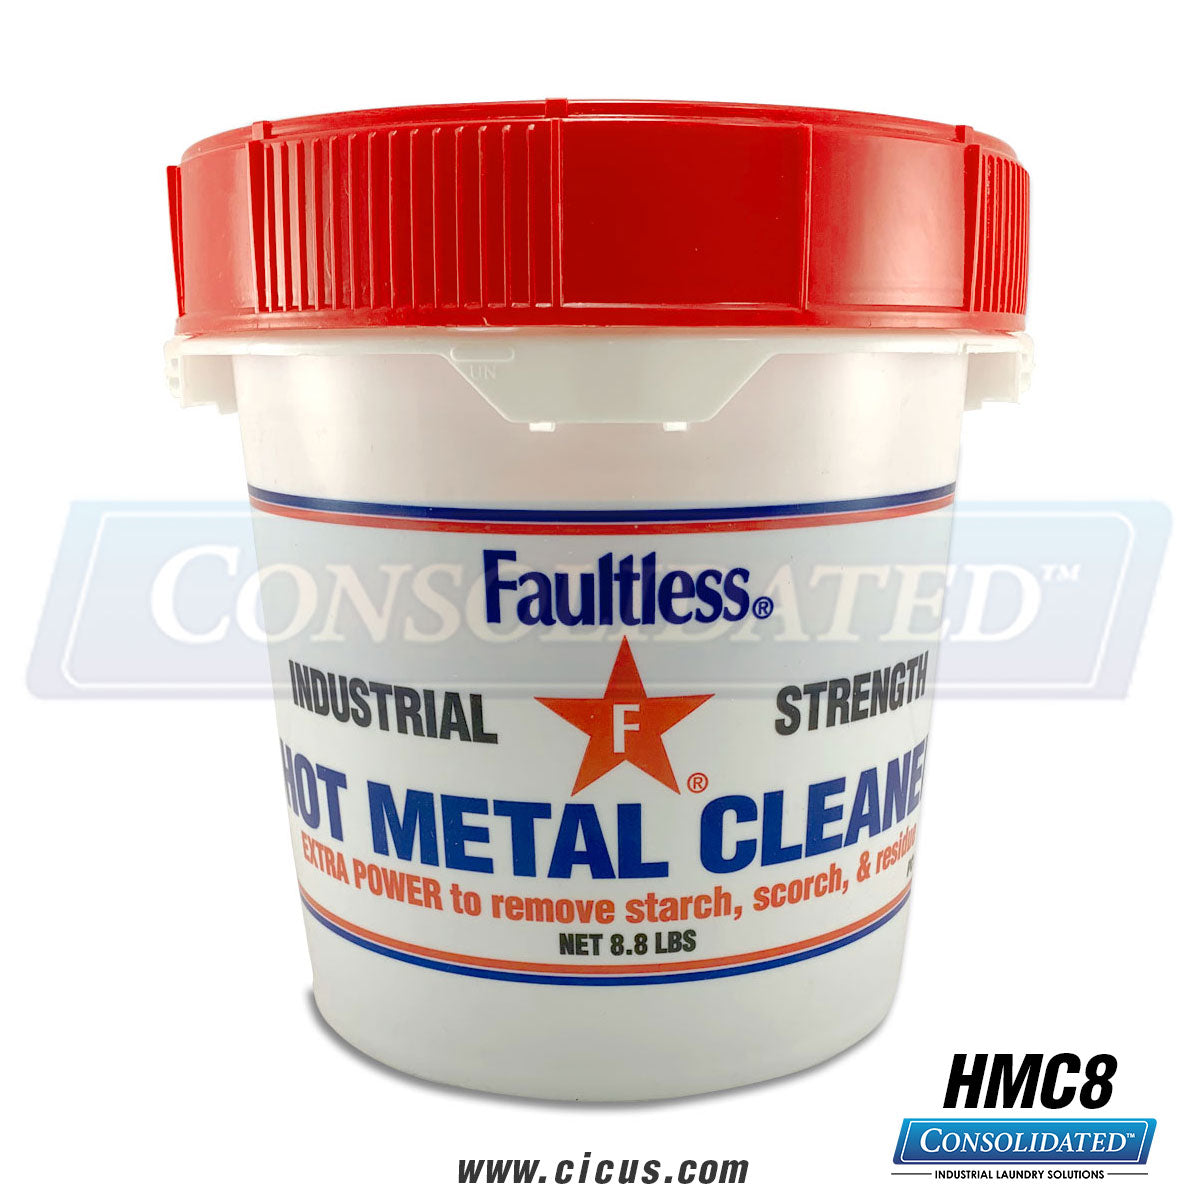 Faultless #8 Hot Metal Cleaner - 8.8 lb. Pail [HMC8] - Consolidated  International Corporation USA